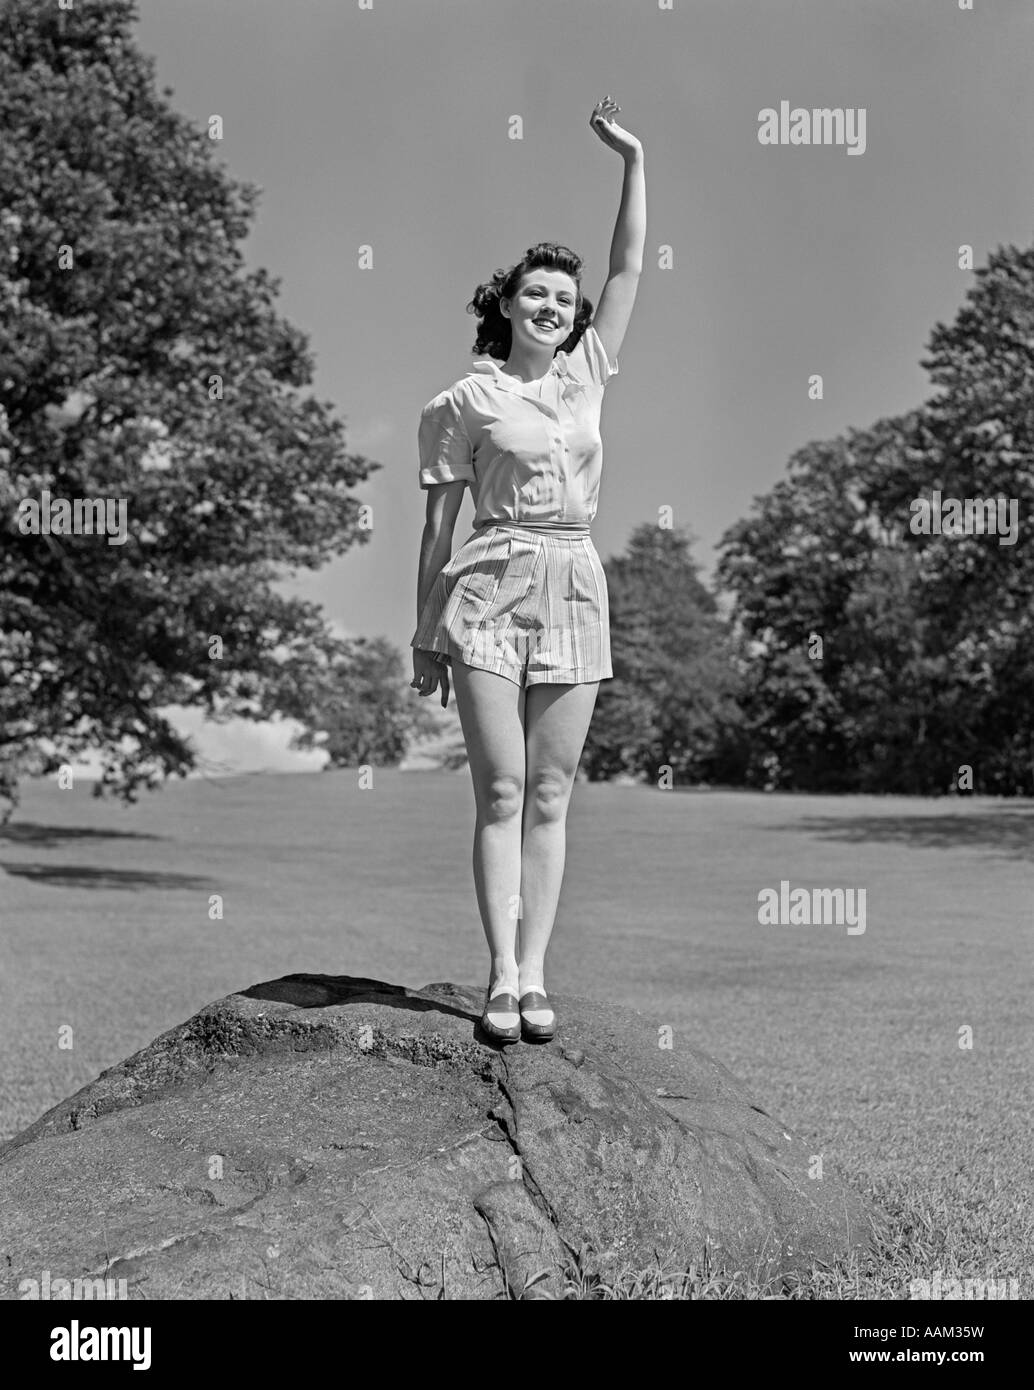 1940s SMILING TEEN WOMAN WEARING SHORTS STANDING ON ROCK WAVING HER HAND ABOVE HER HEAD Stock Photo